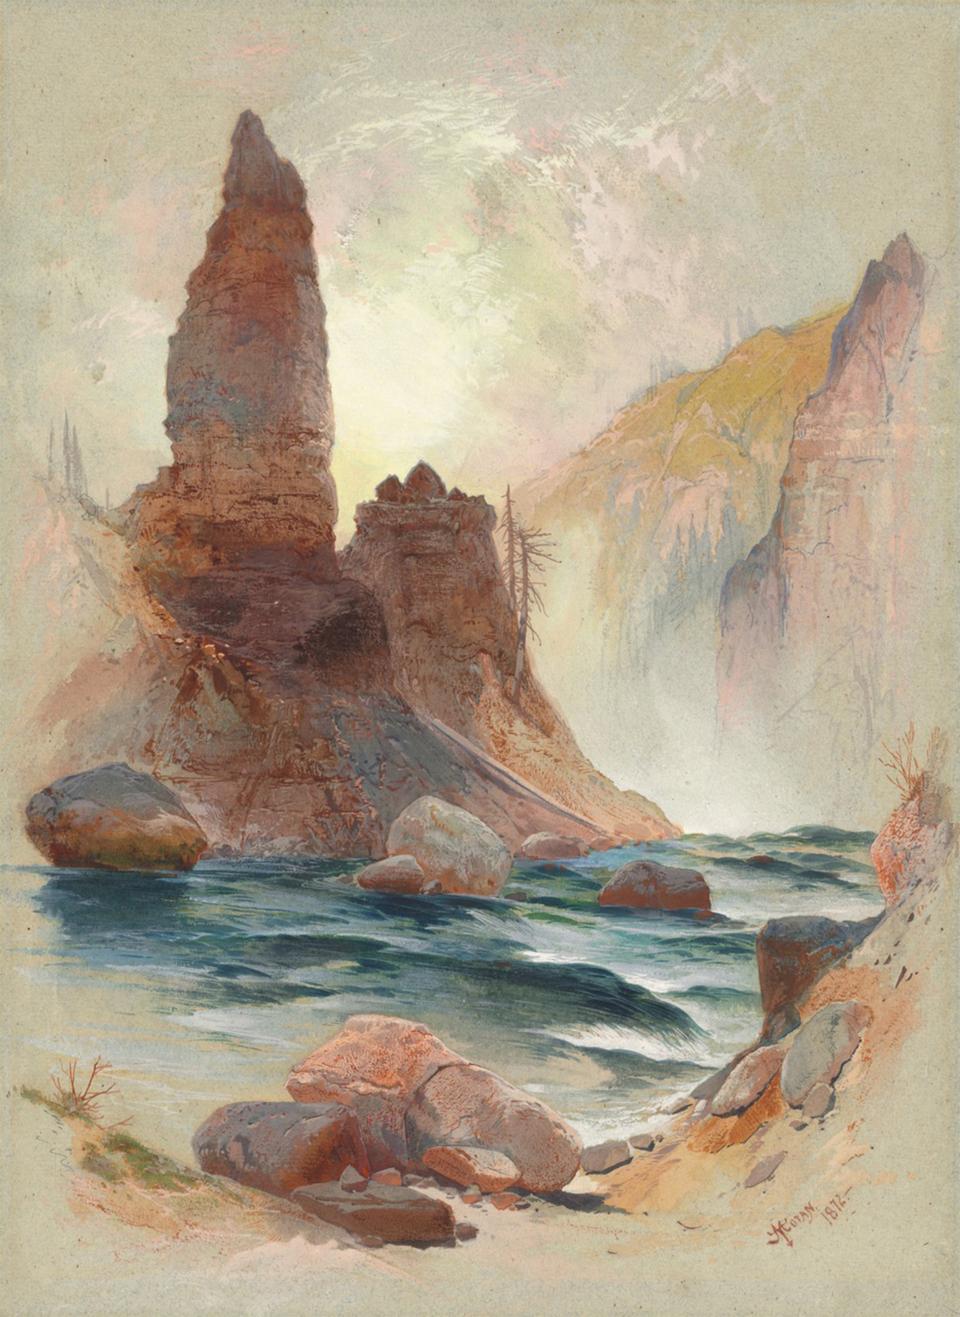 Tower at Tower Falls, Yellowstone, 1872. Thomas Moran, watercolor and gouache over graphite. National Gallery of Art.